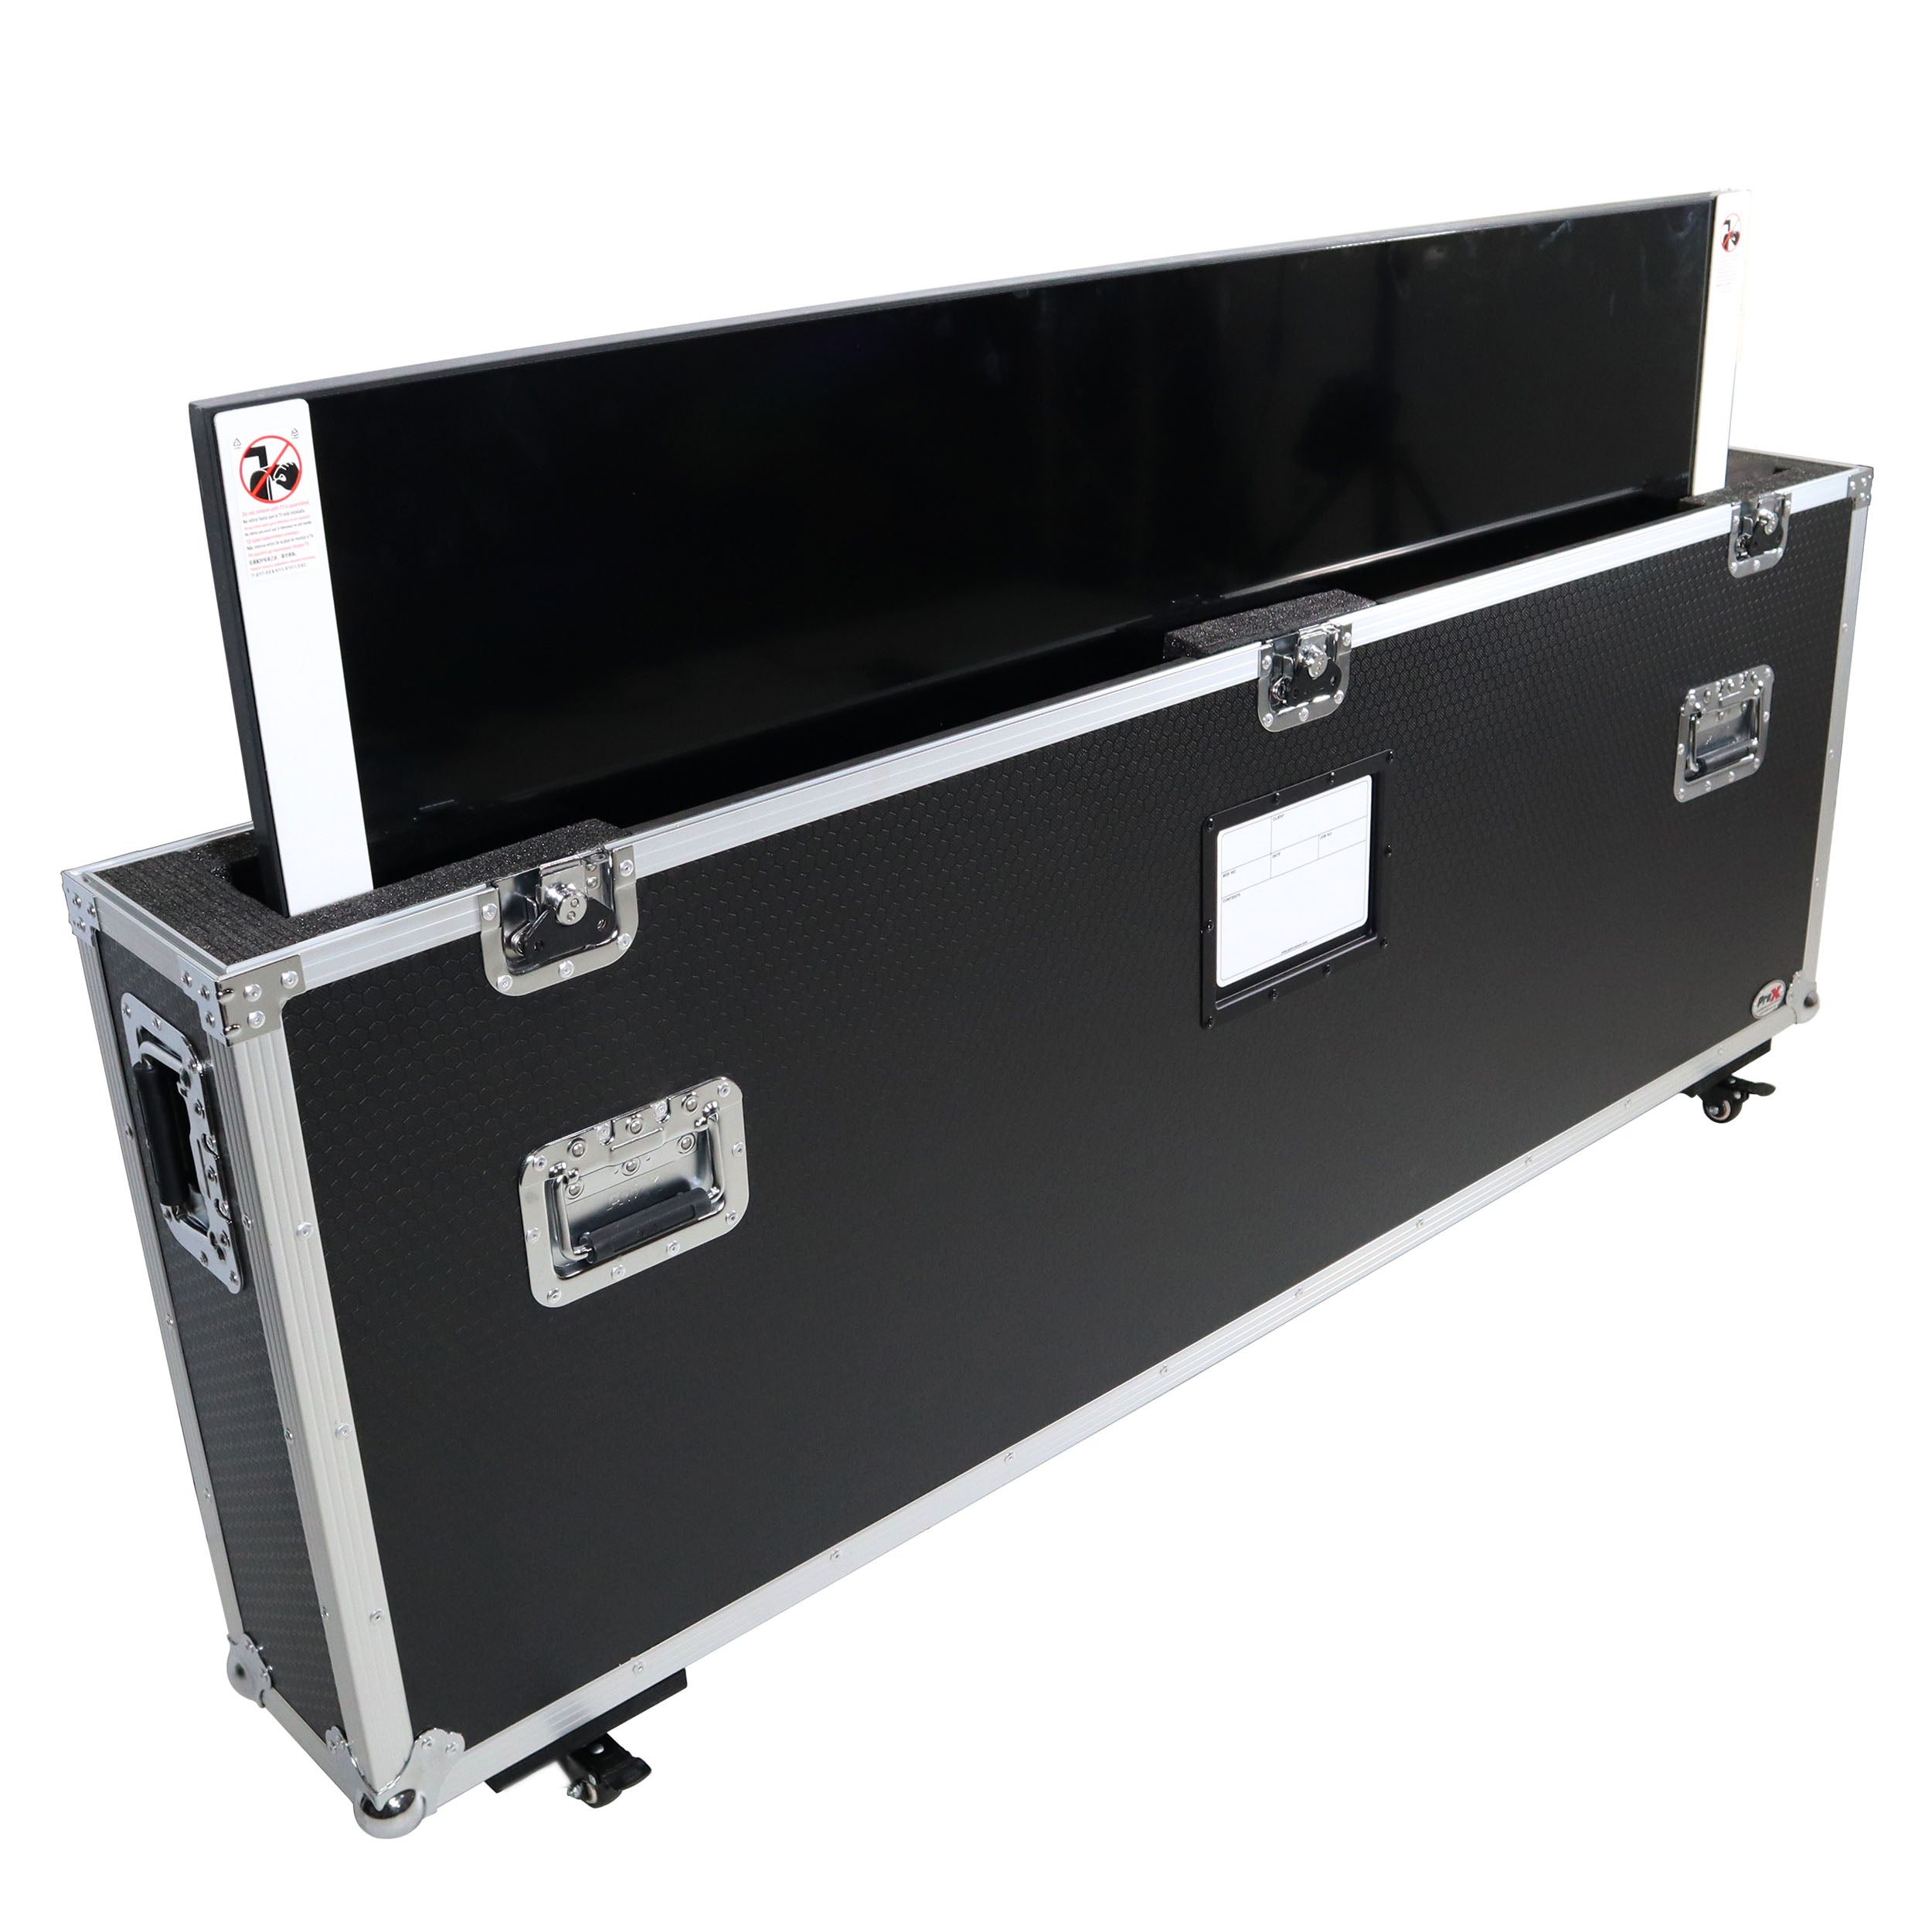 Pro X ATA Flight Style Road Case for 43" to 50" LED TV with Wheels and Foam Blocks XS-TV4350W